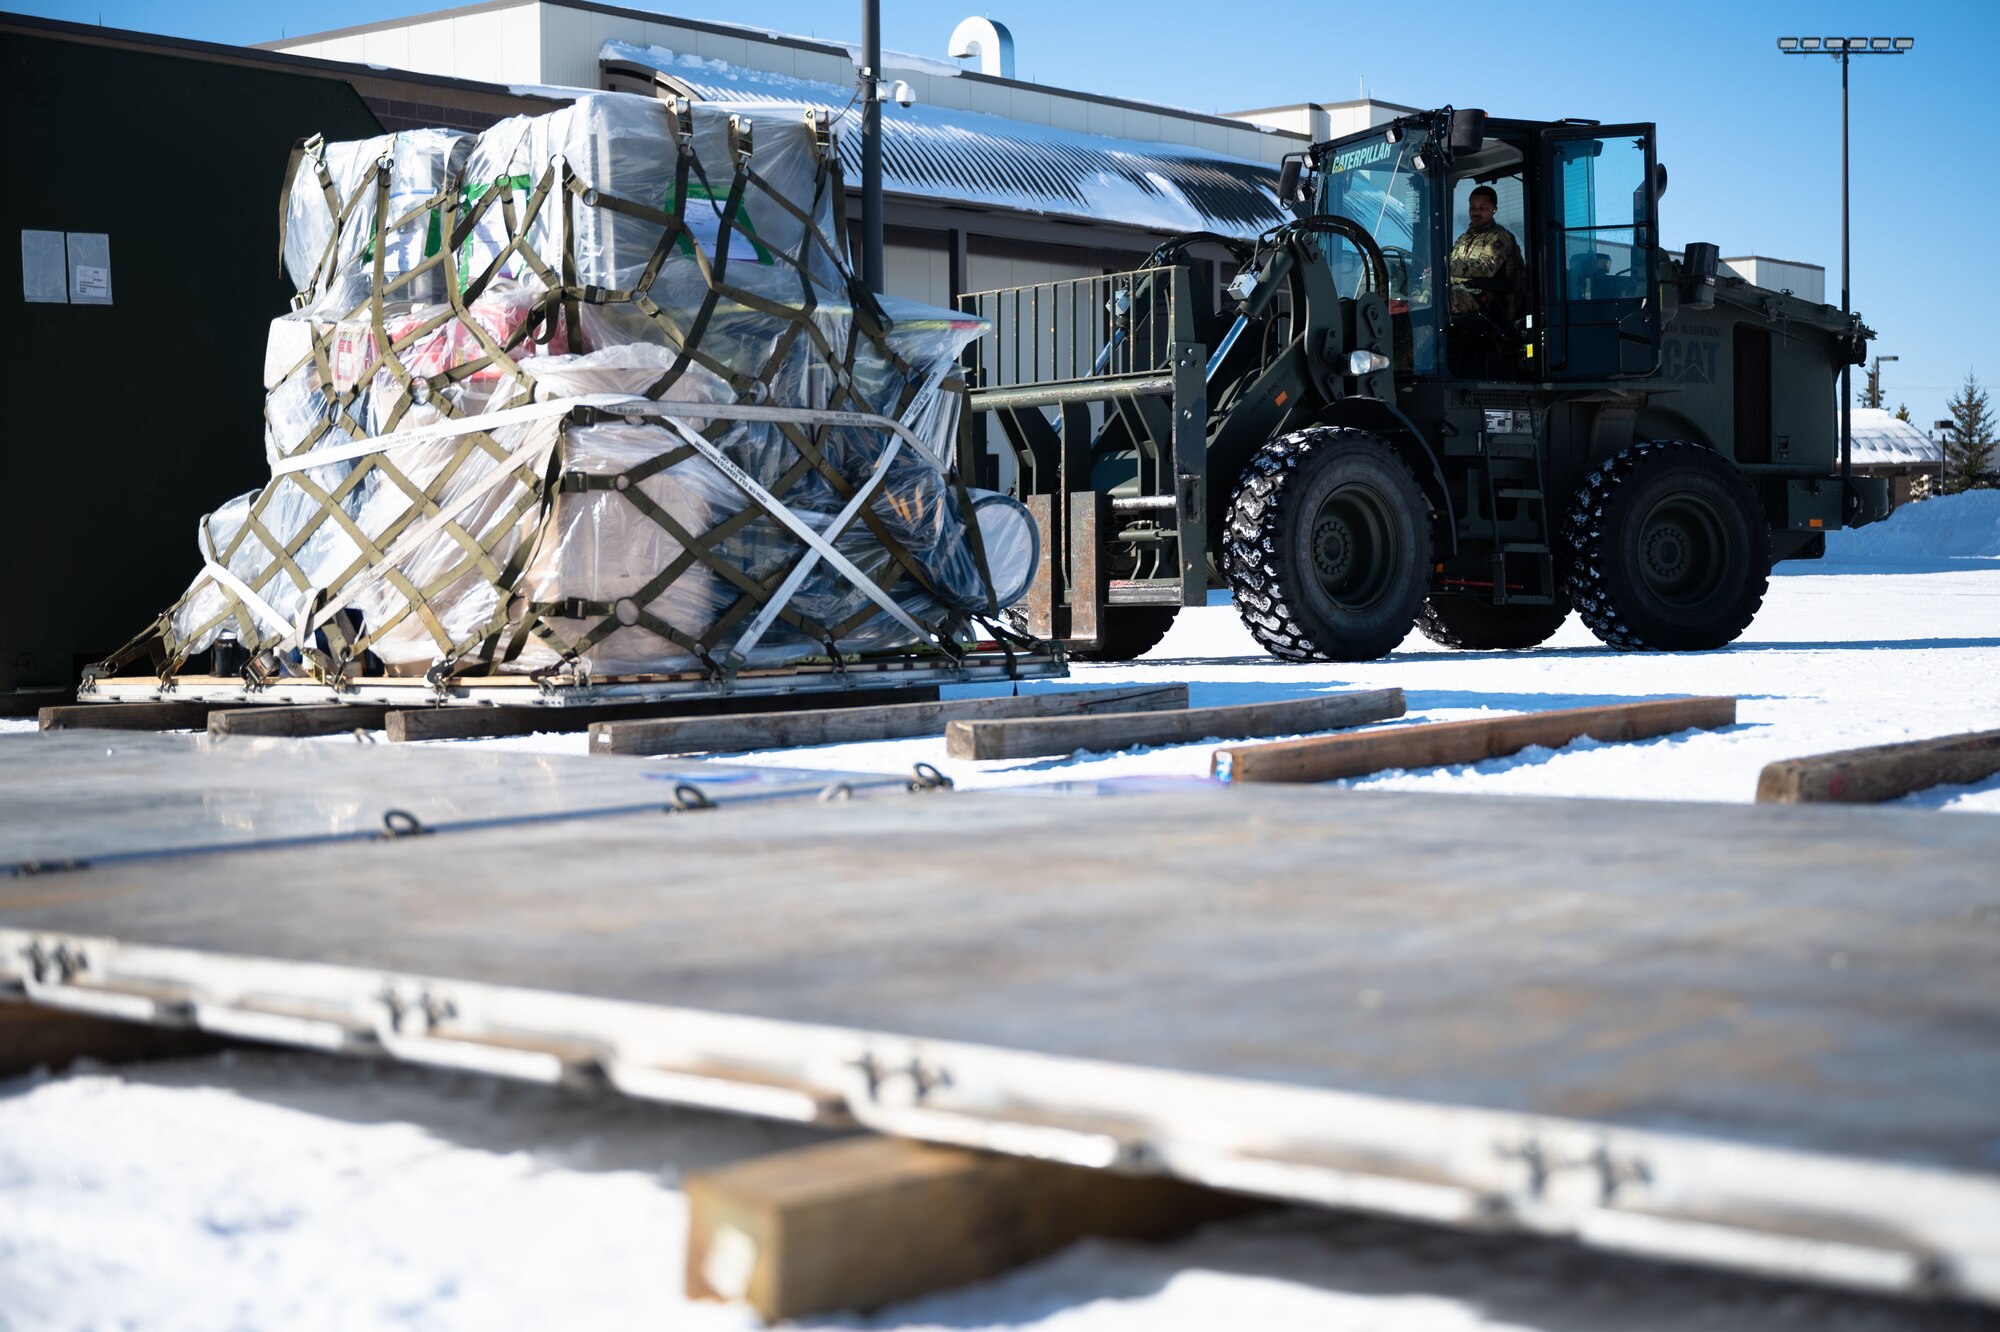 U.S. Air Force Airman 1st Class Cambrin Dixon, a 354th Logistics Readiness Squadron vehicle operator, picks up a cargo using a forklift during Arctic Gold 21-2 on Eielson Air Force Base, Alaska, April 6, 2021. AG 21-2 is a readiness exercise demonstrating the 354th Fighter Wing’s ability to generate F-35A Lightning II aircraft and deploy forces and cargo from across the wing. (U.S. Air Force photo by Airman 1st Class Jose Miguel T. Tamondong)